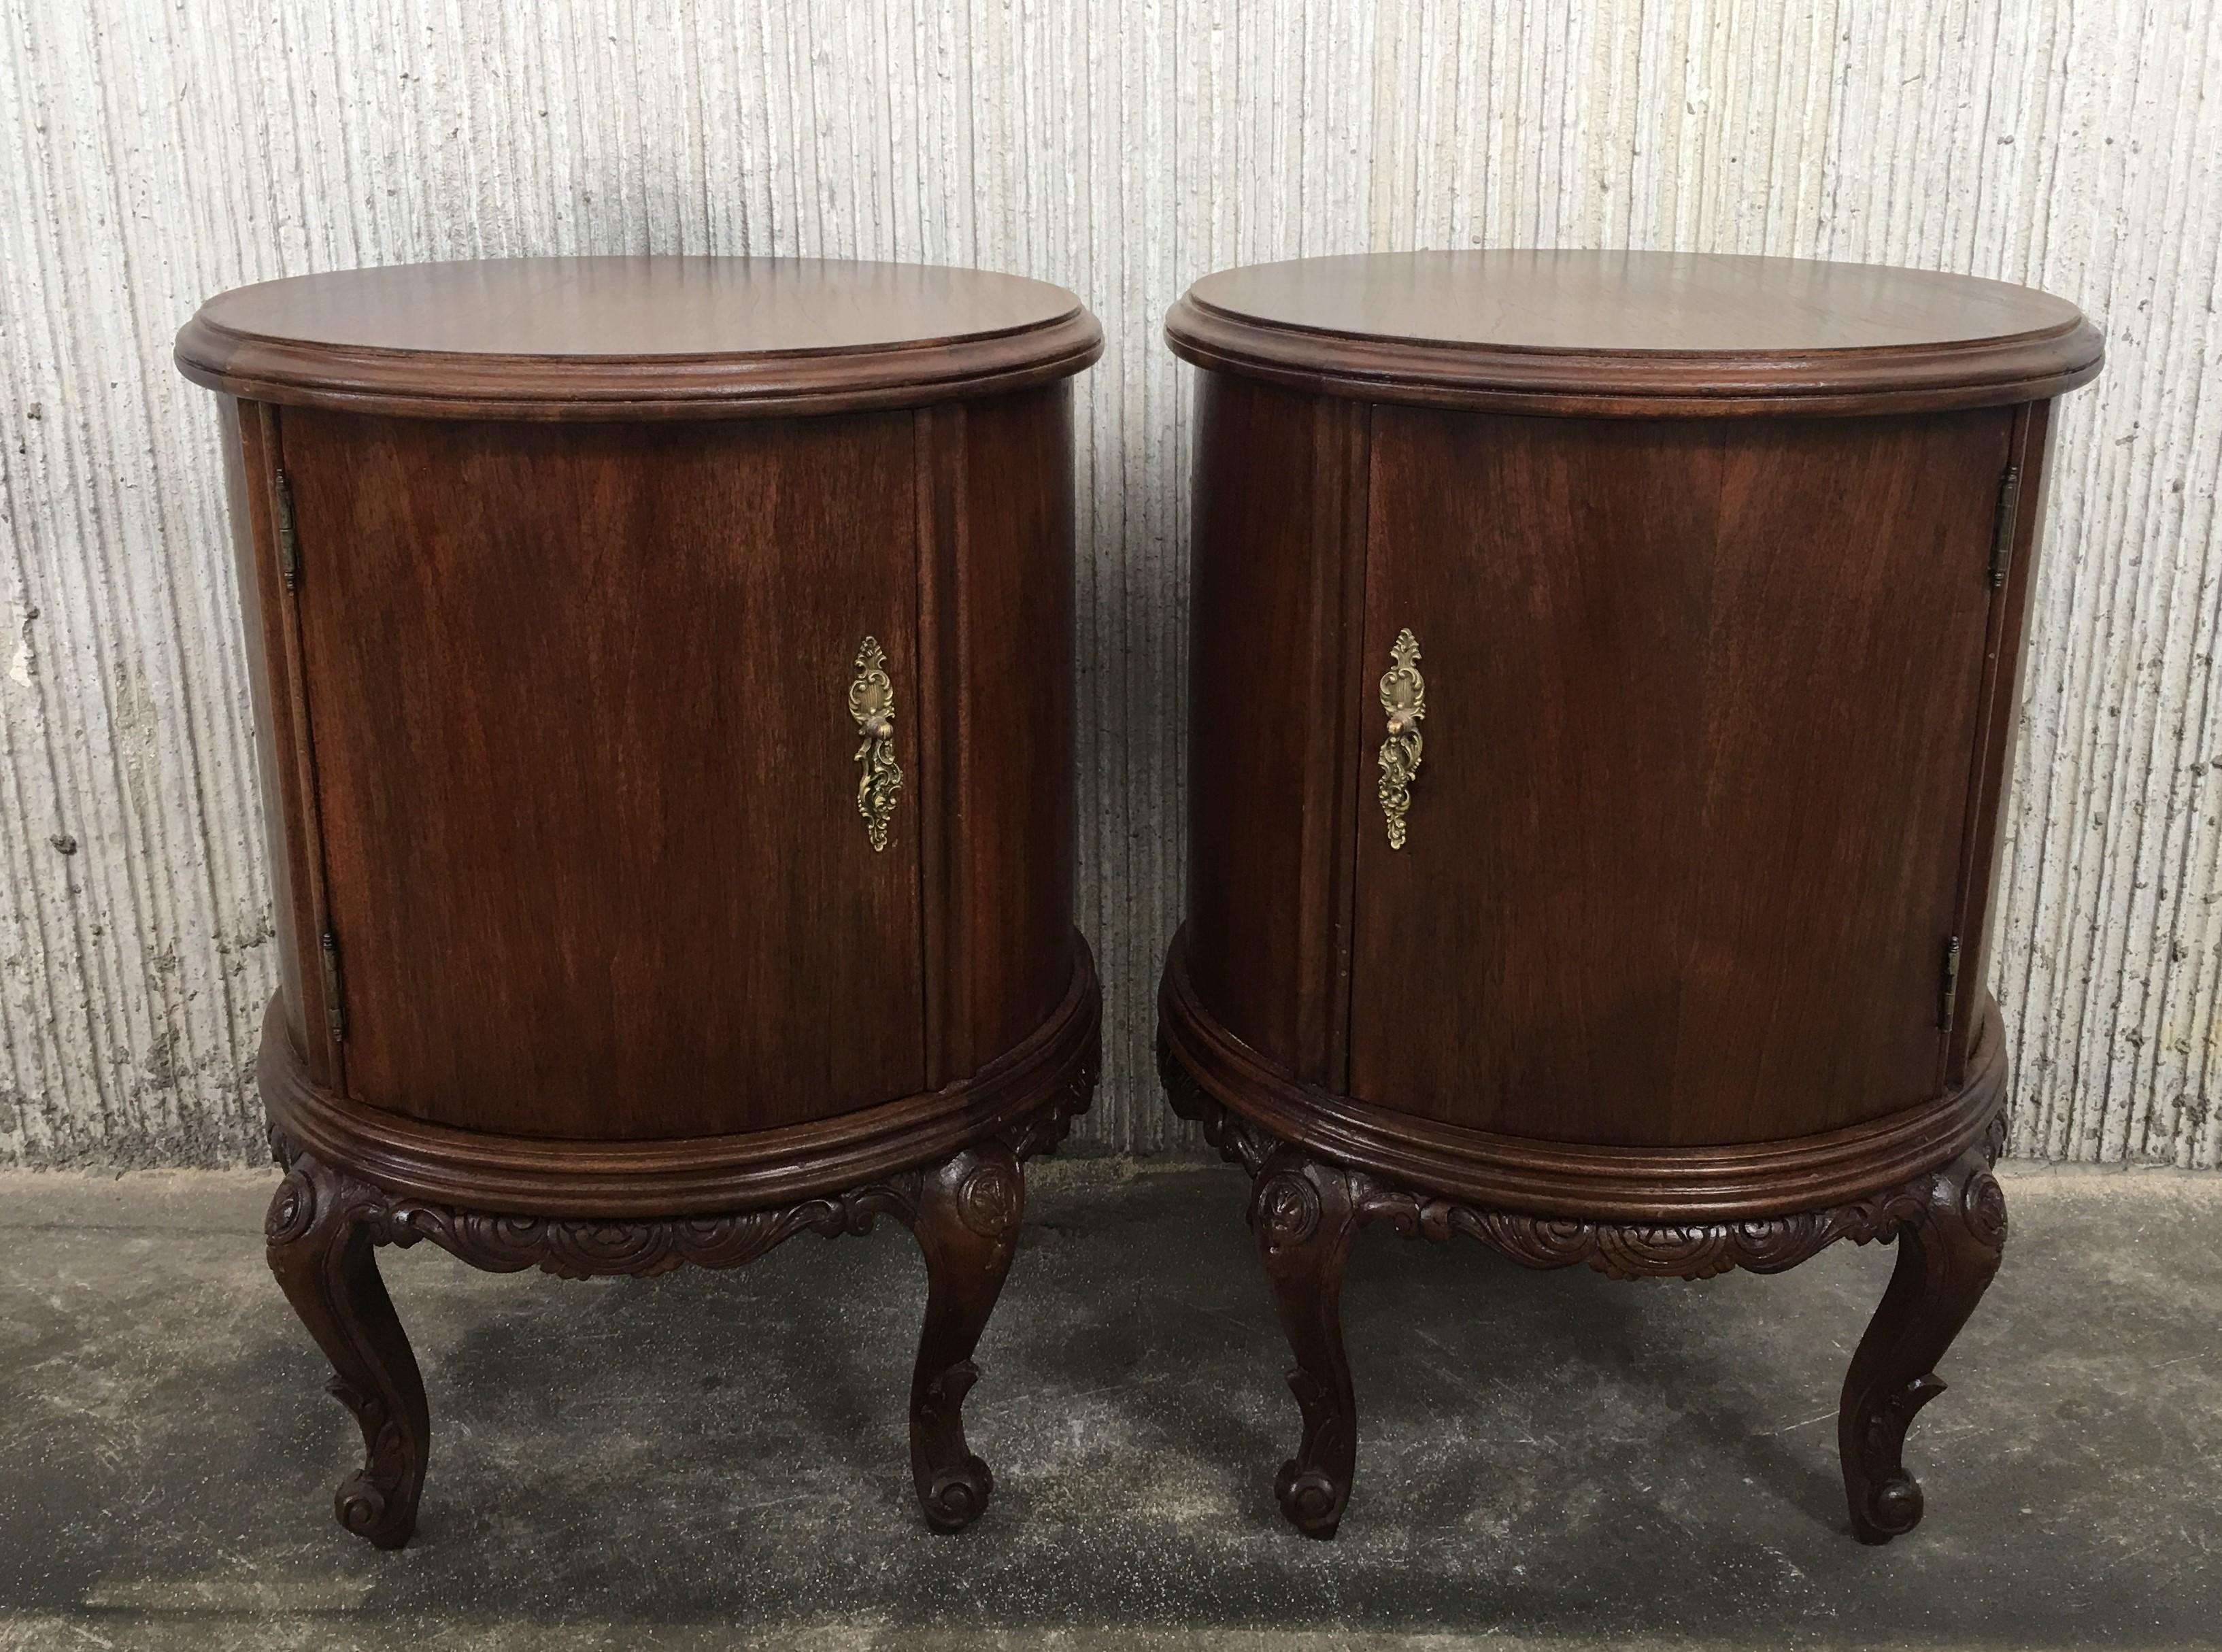 Pair of marquetry nightstands with metal crest one drawer and one compartment of ceramic.
Originals handles and garniture.

Measures: Height to the table 30.75 in
Total Height 39.75 in.
 